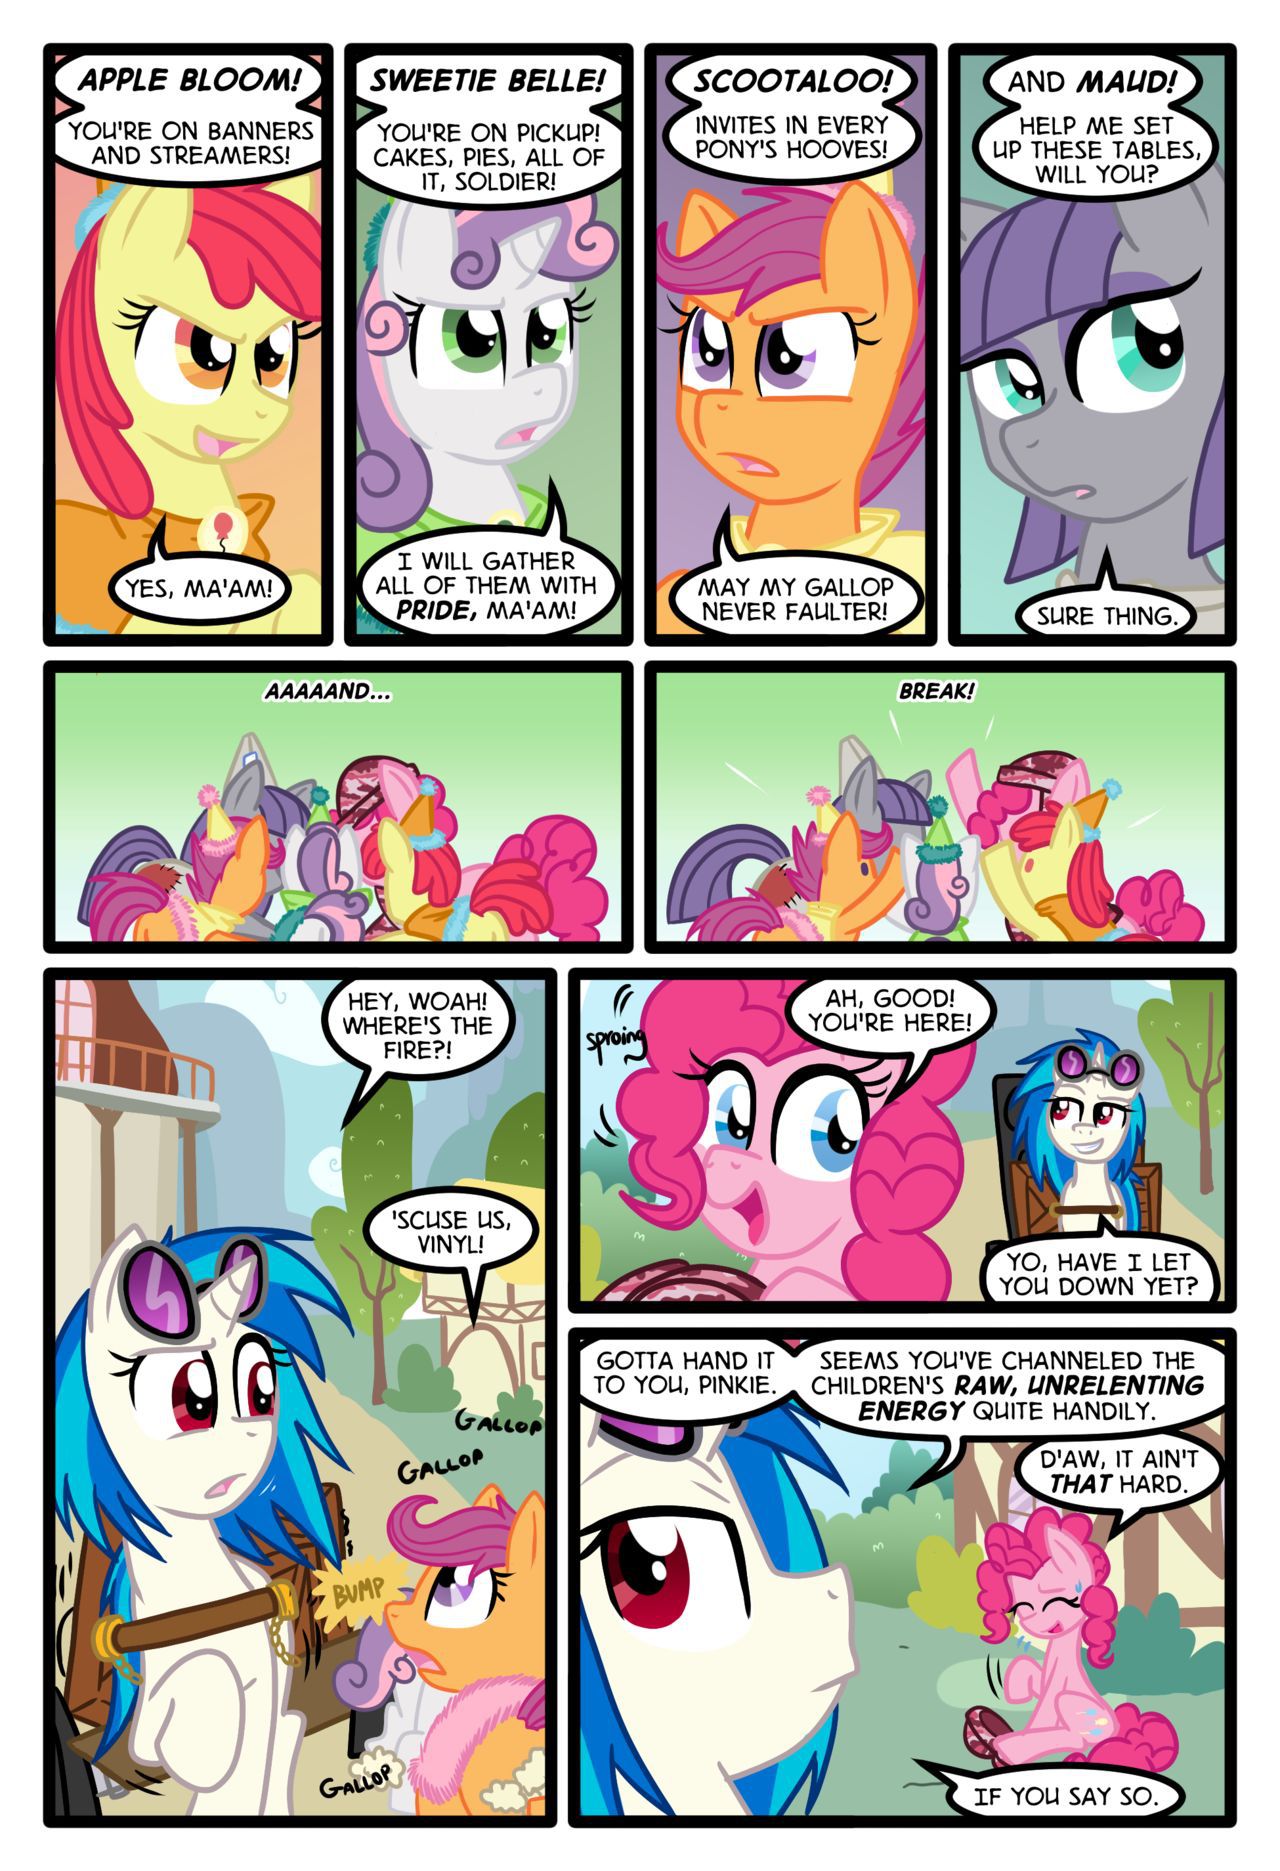 [Zaron] Lonely Hooves (My Little Pony Friendship Is Magic) [Ongoing] 42